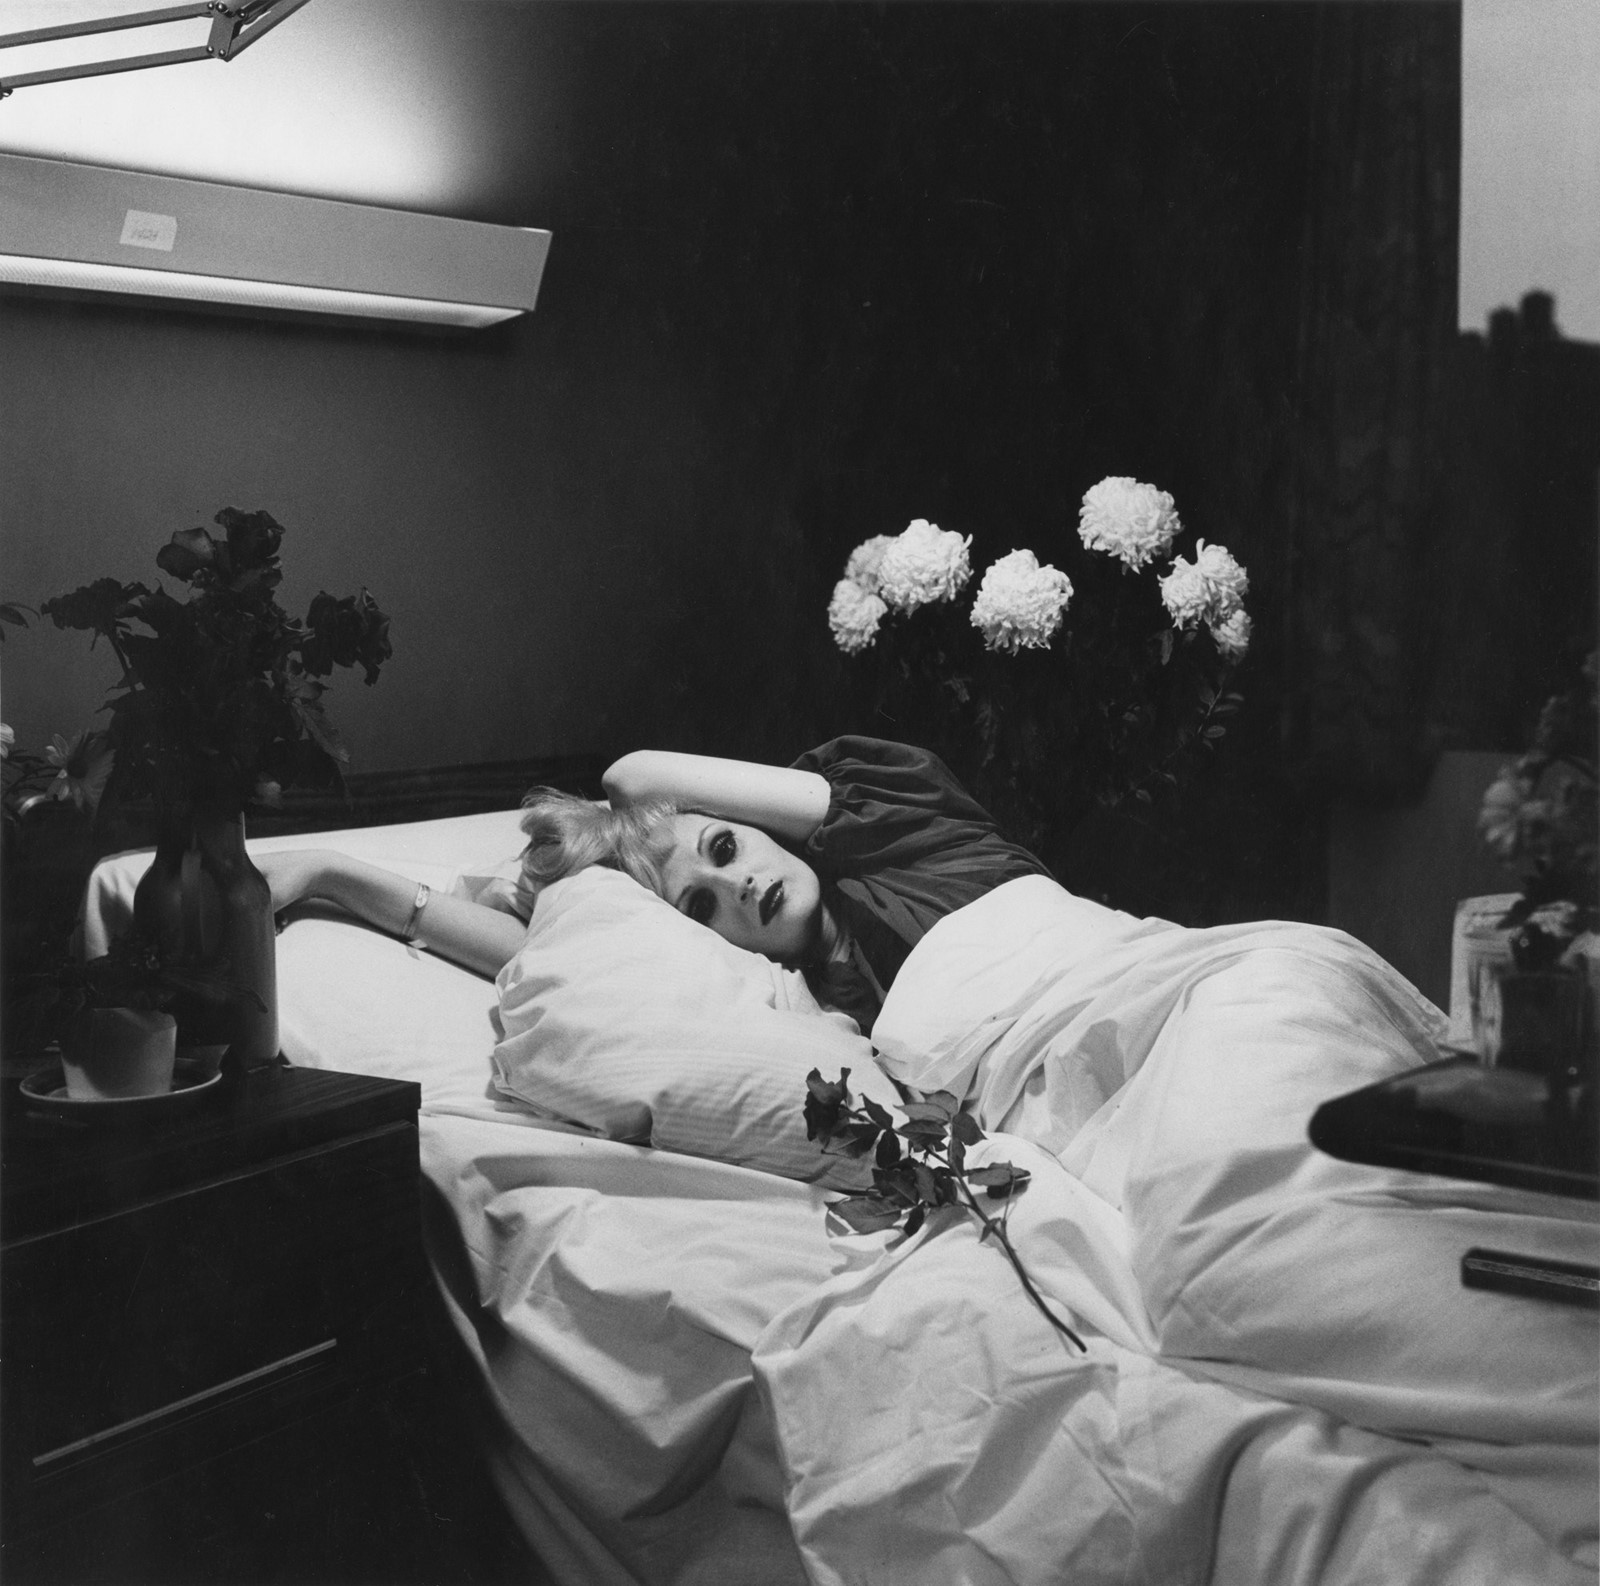 Peter Hujar, Candy Darling on her Deathbed, 1974